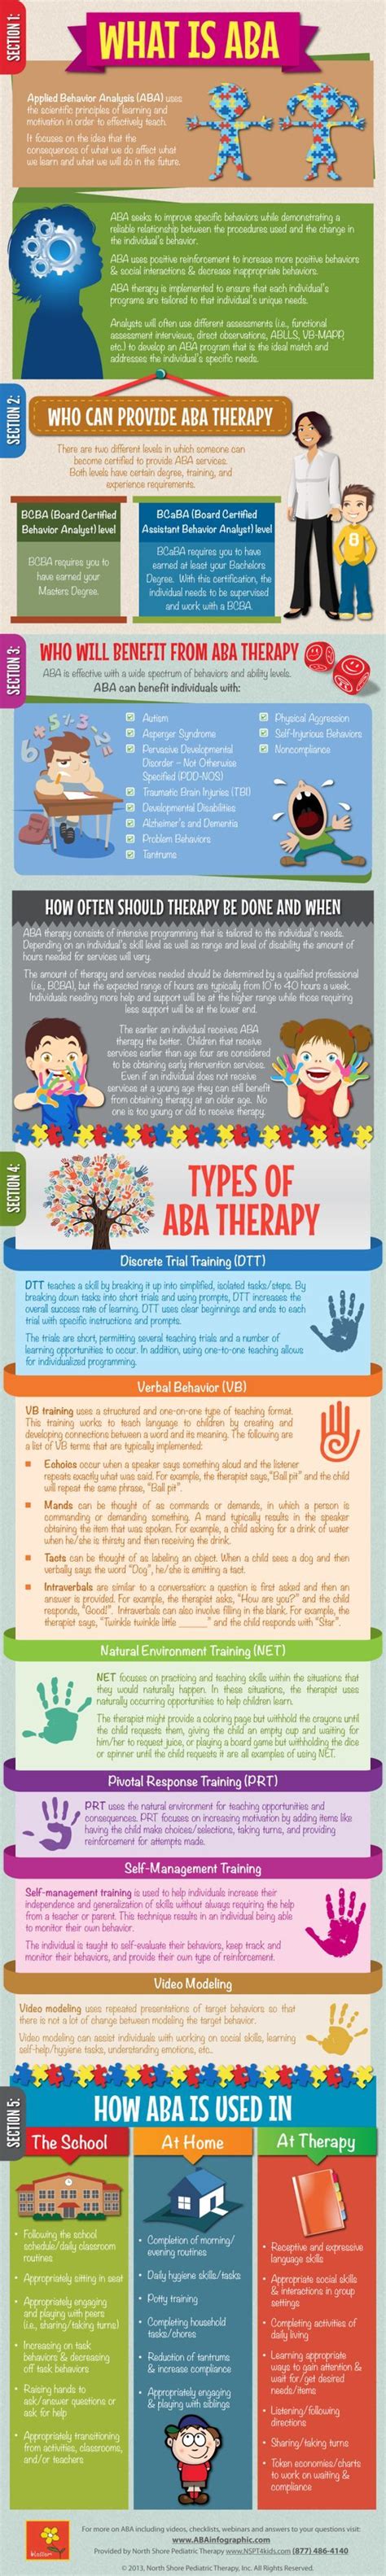 aba infographic breaks aba   easy  understand language     interested